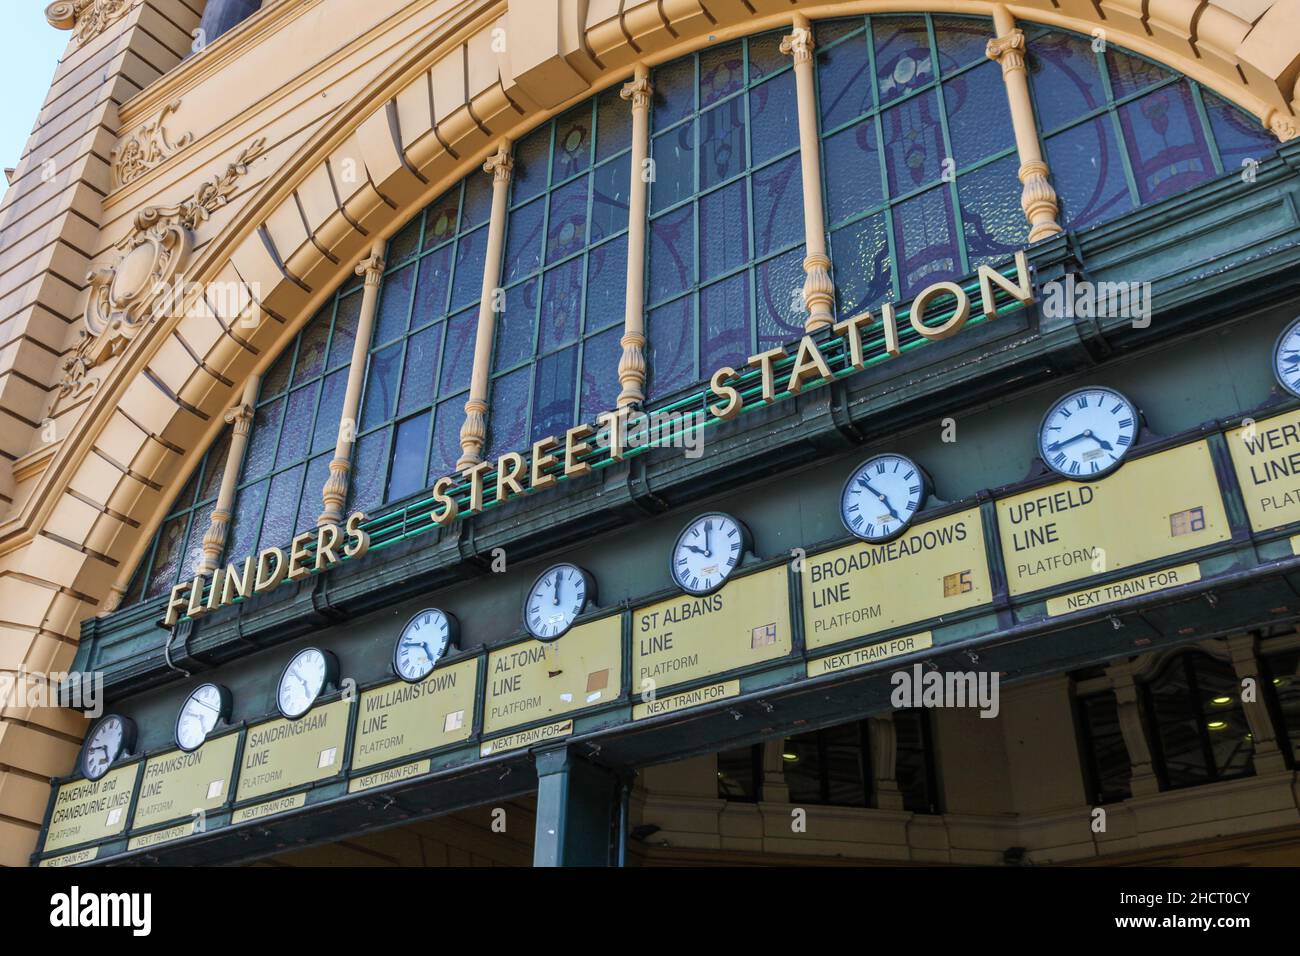 Flinders street station is one of the major train stations in Melbourne. This image shows the facade of one of the entries to the station. Stock Photo